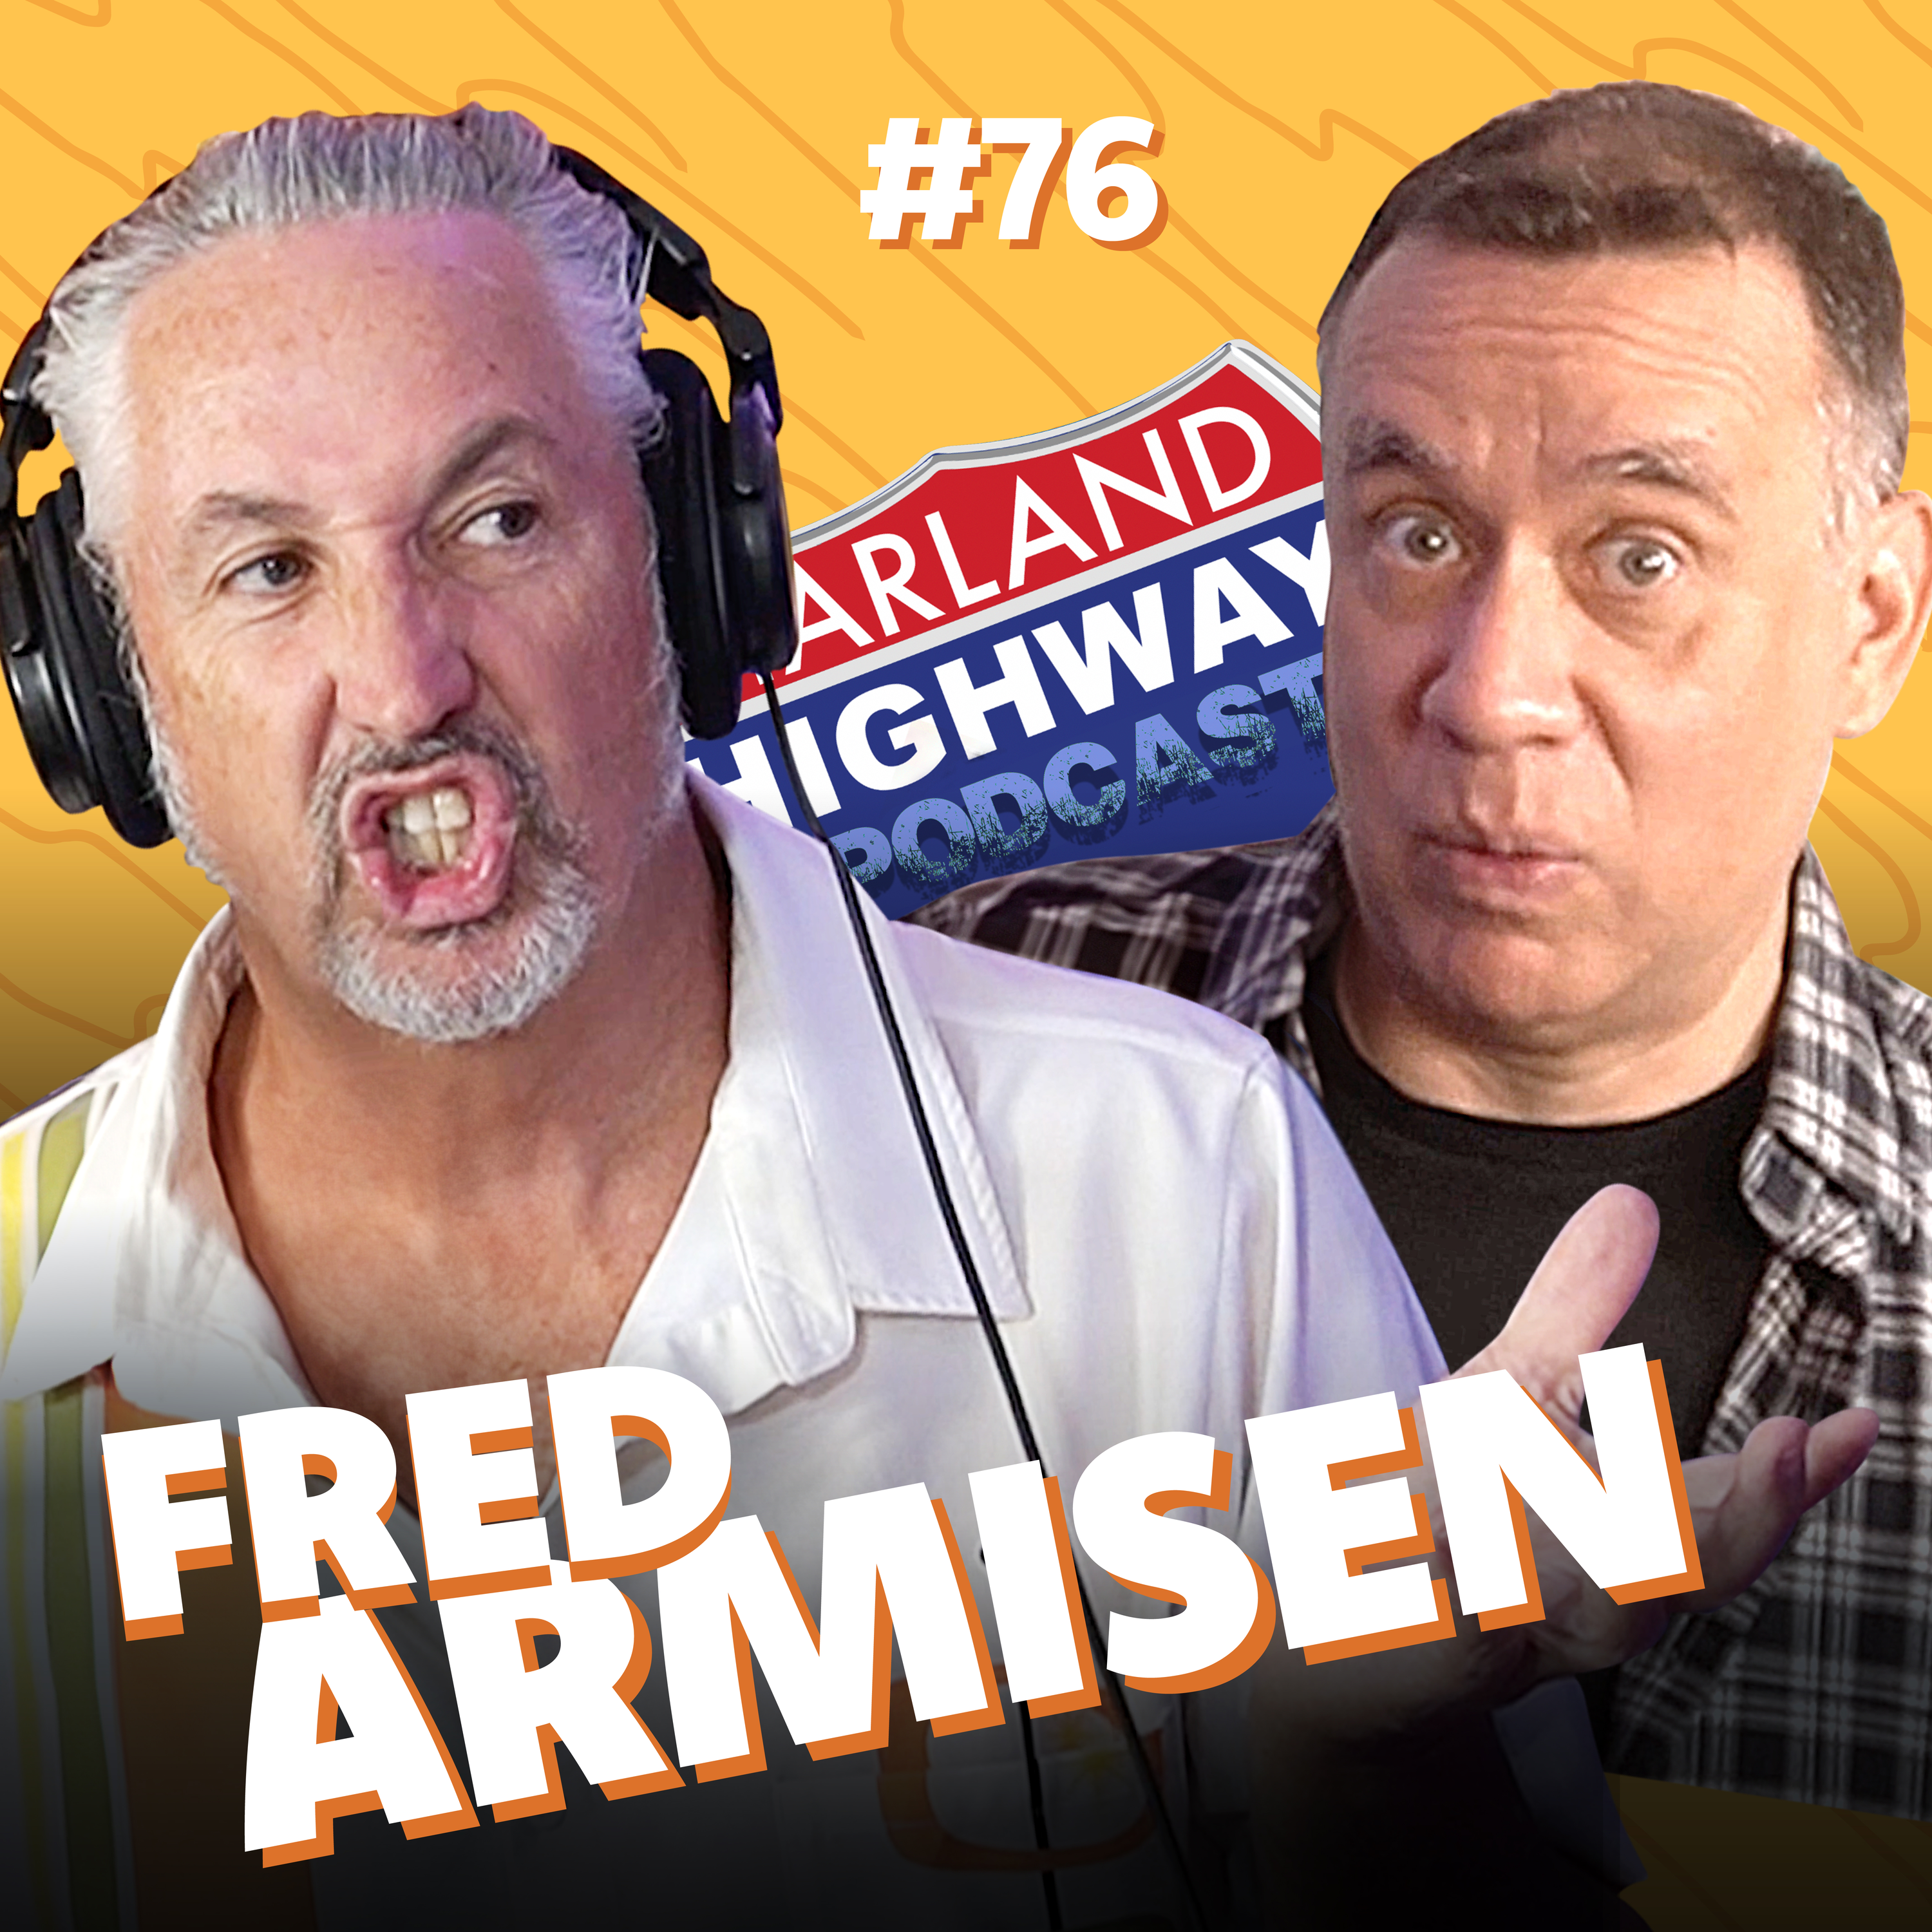 NEW HARLAND HIGHWAY #76 - FRED ARMISEN - Comedian, Actor, Writer - Portlandia, SNL, E=Mc2, Irish, and drumming are all discussed.